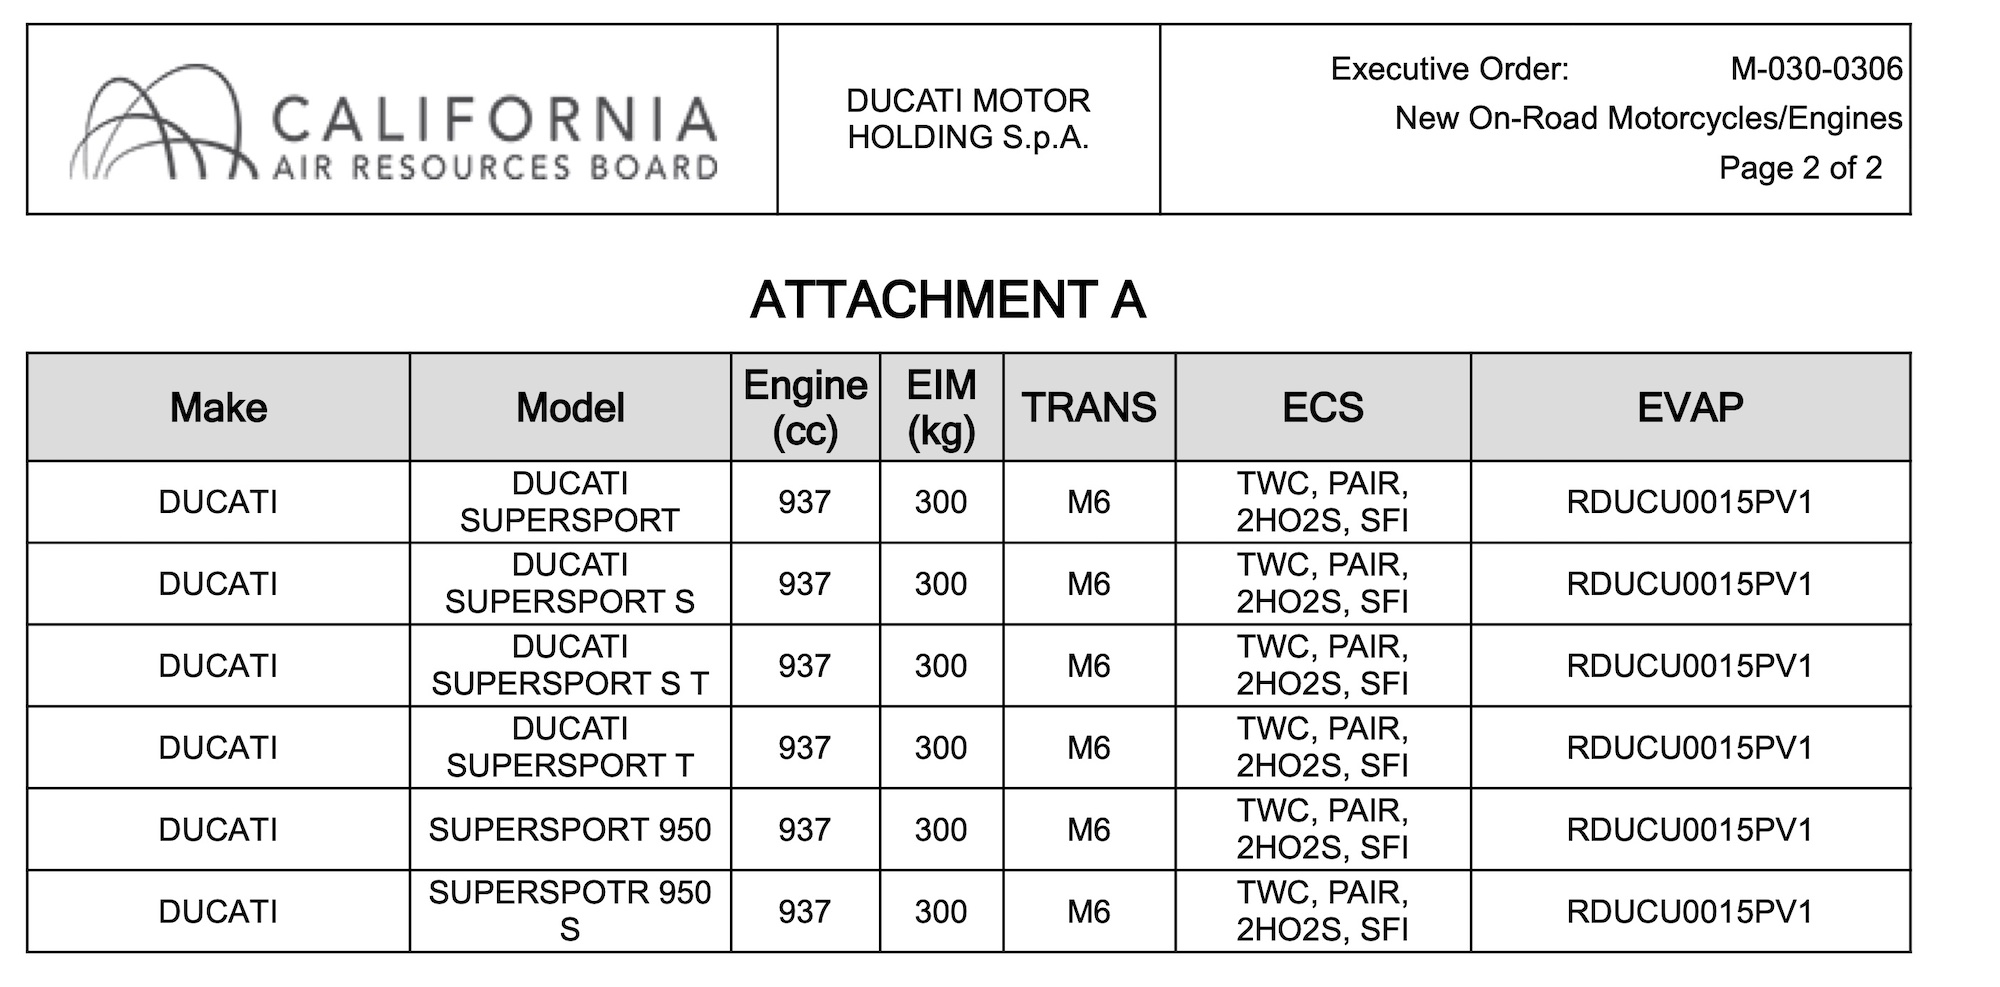 A view of a recent filing with the California Air Resources Board, showing a few Supersport variants with "T" attached. Media sourced from the California Air Resources Board.